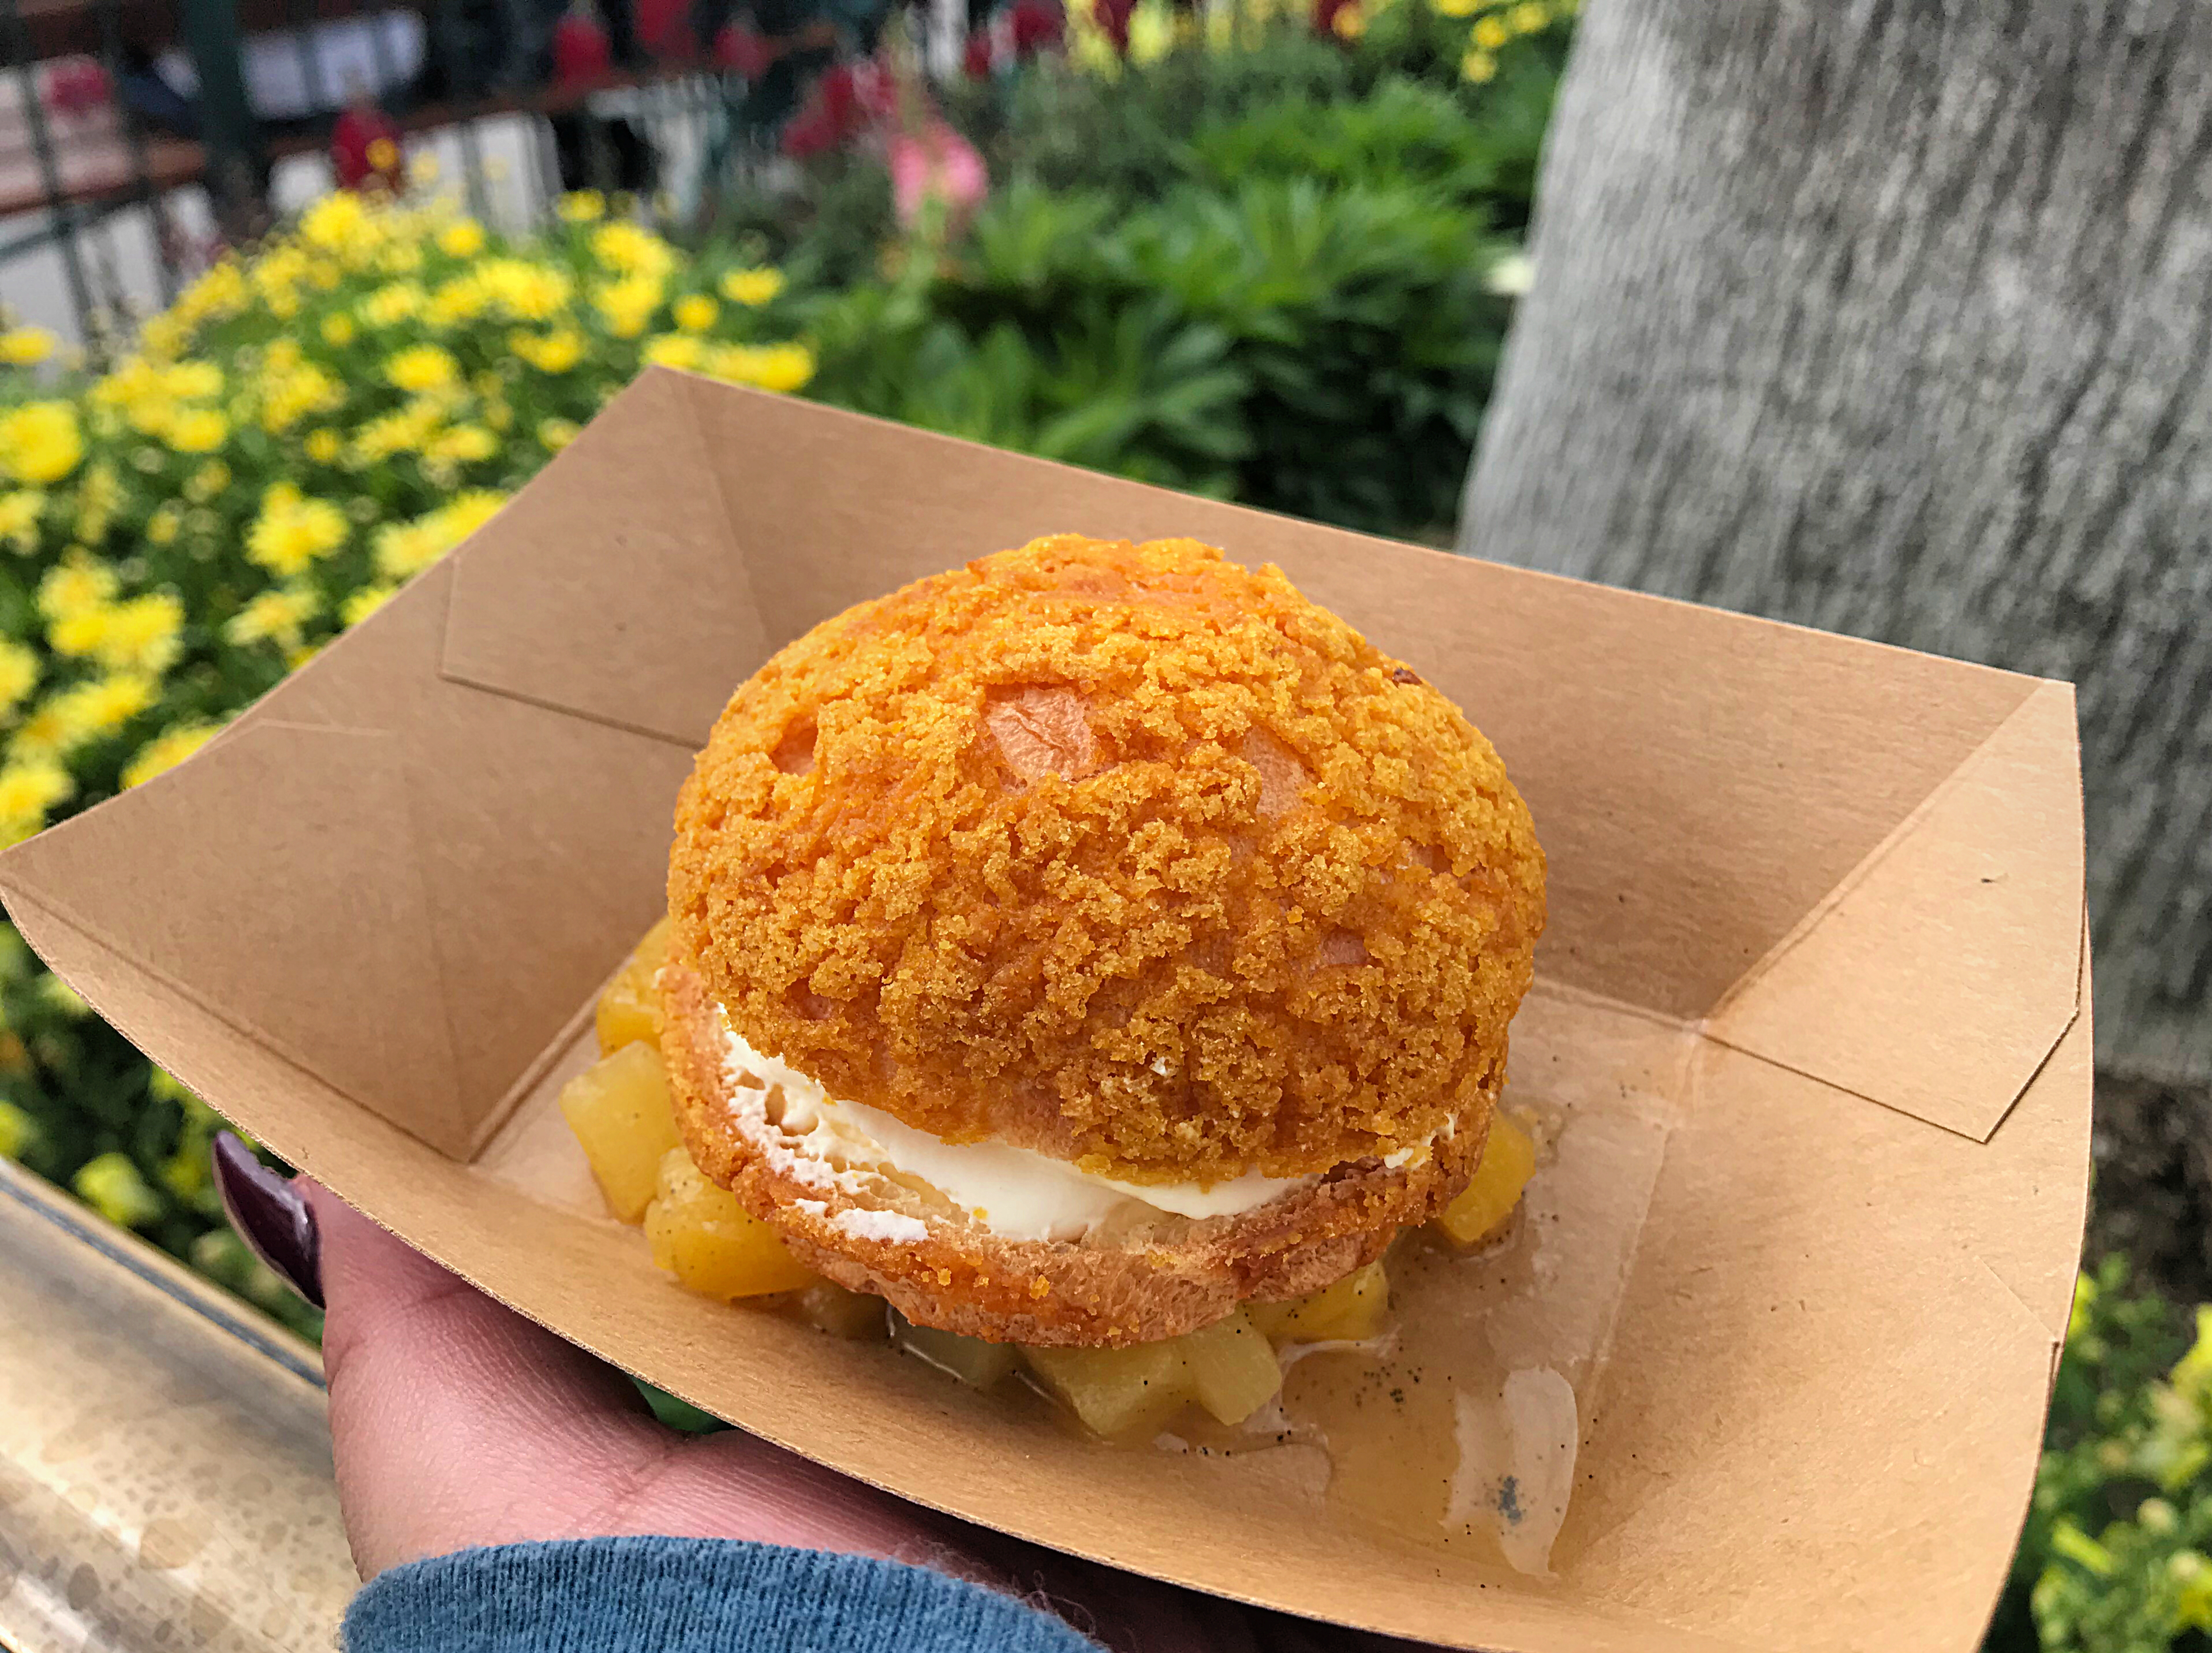 New Marketplace at Food and Wine Festival Serves Up Yummy Cream Puff